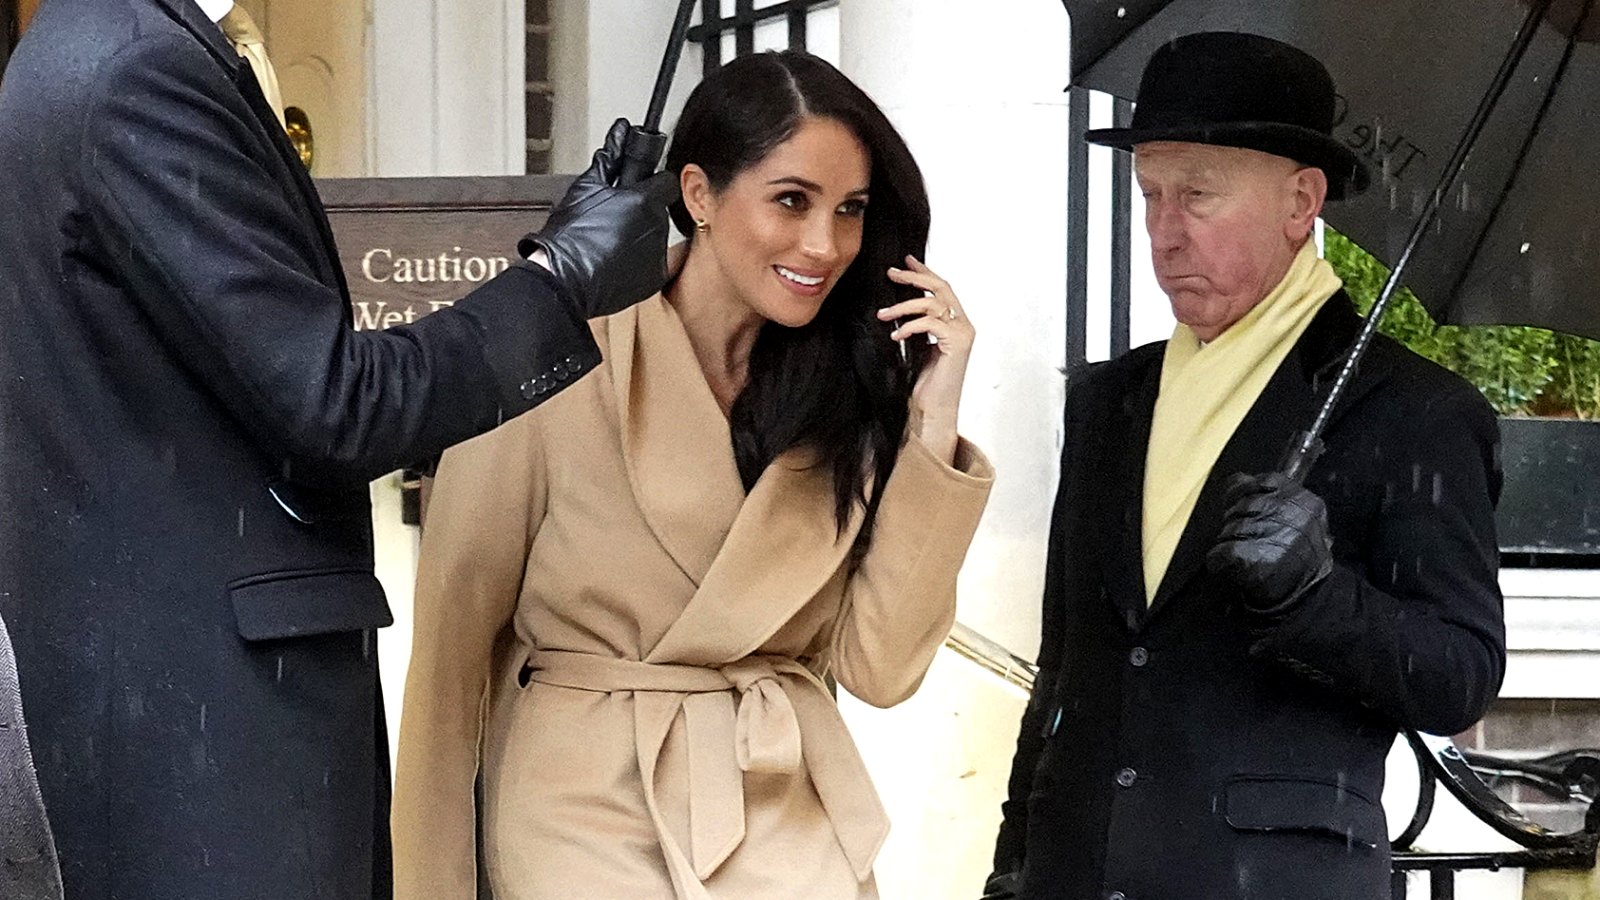 Meghan-Markle-is-spotted-in-London-as-she-departs-the-the-Goring-Hotel